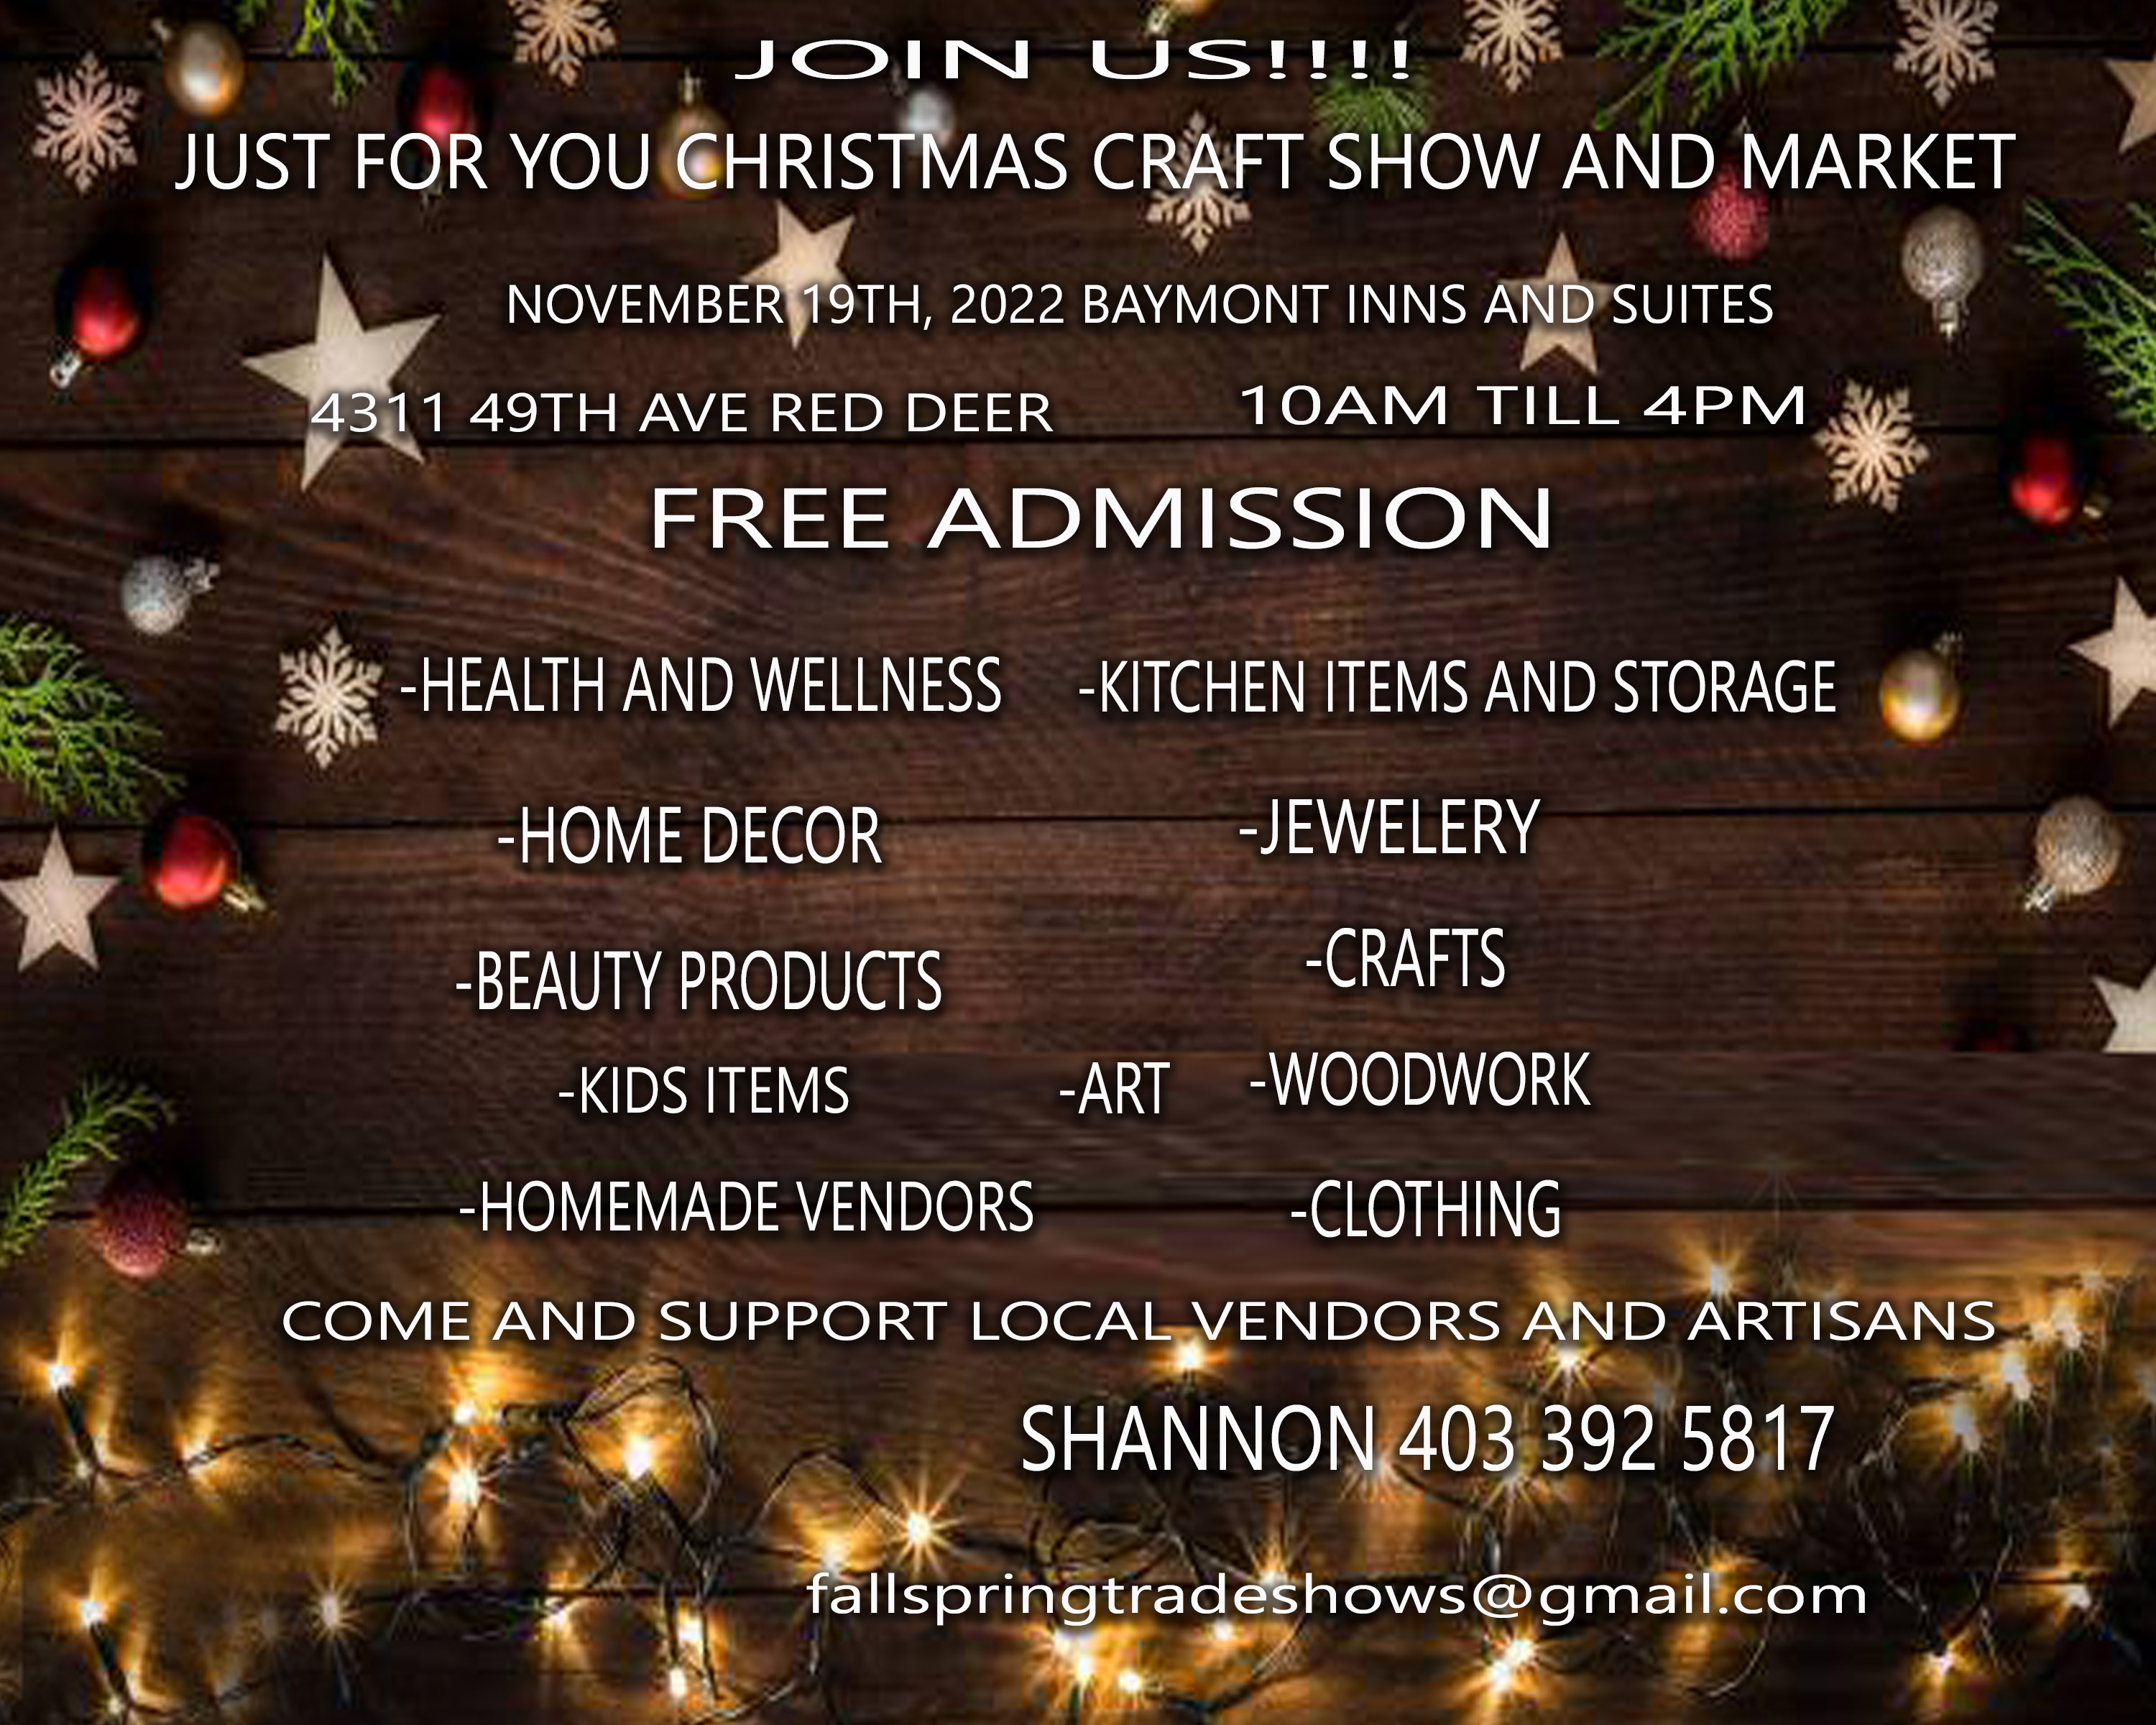 Just For You Christmas Craft Show and Market 